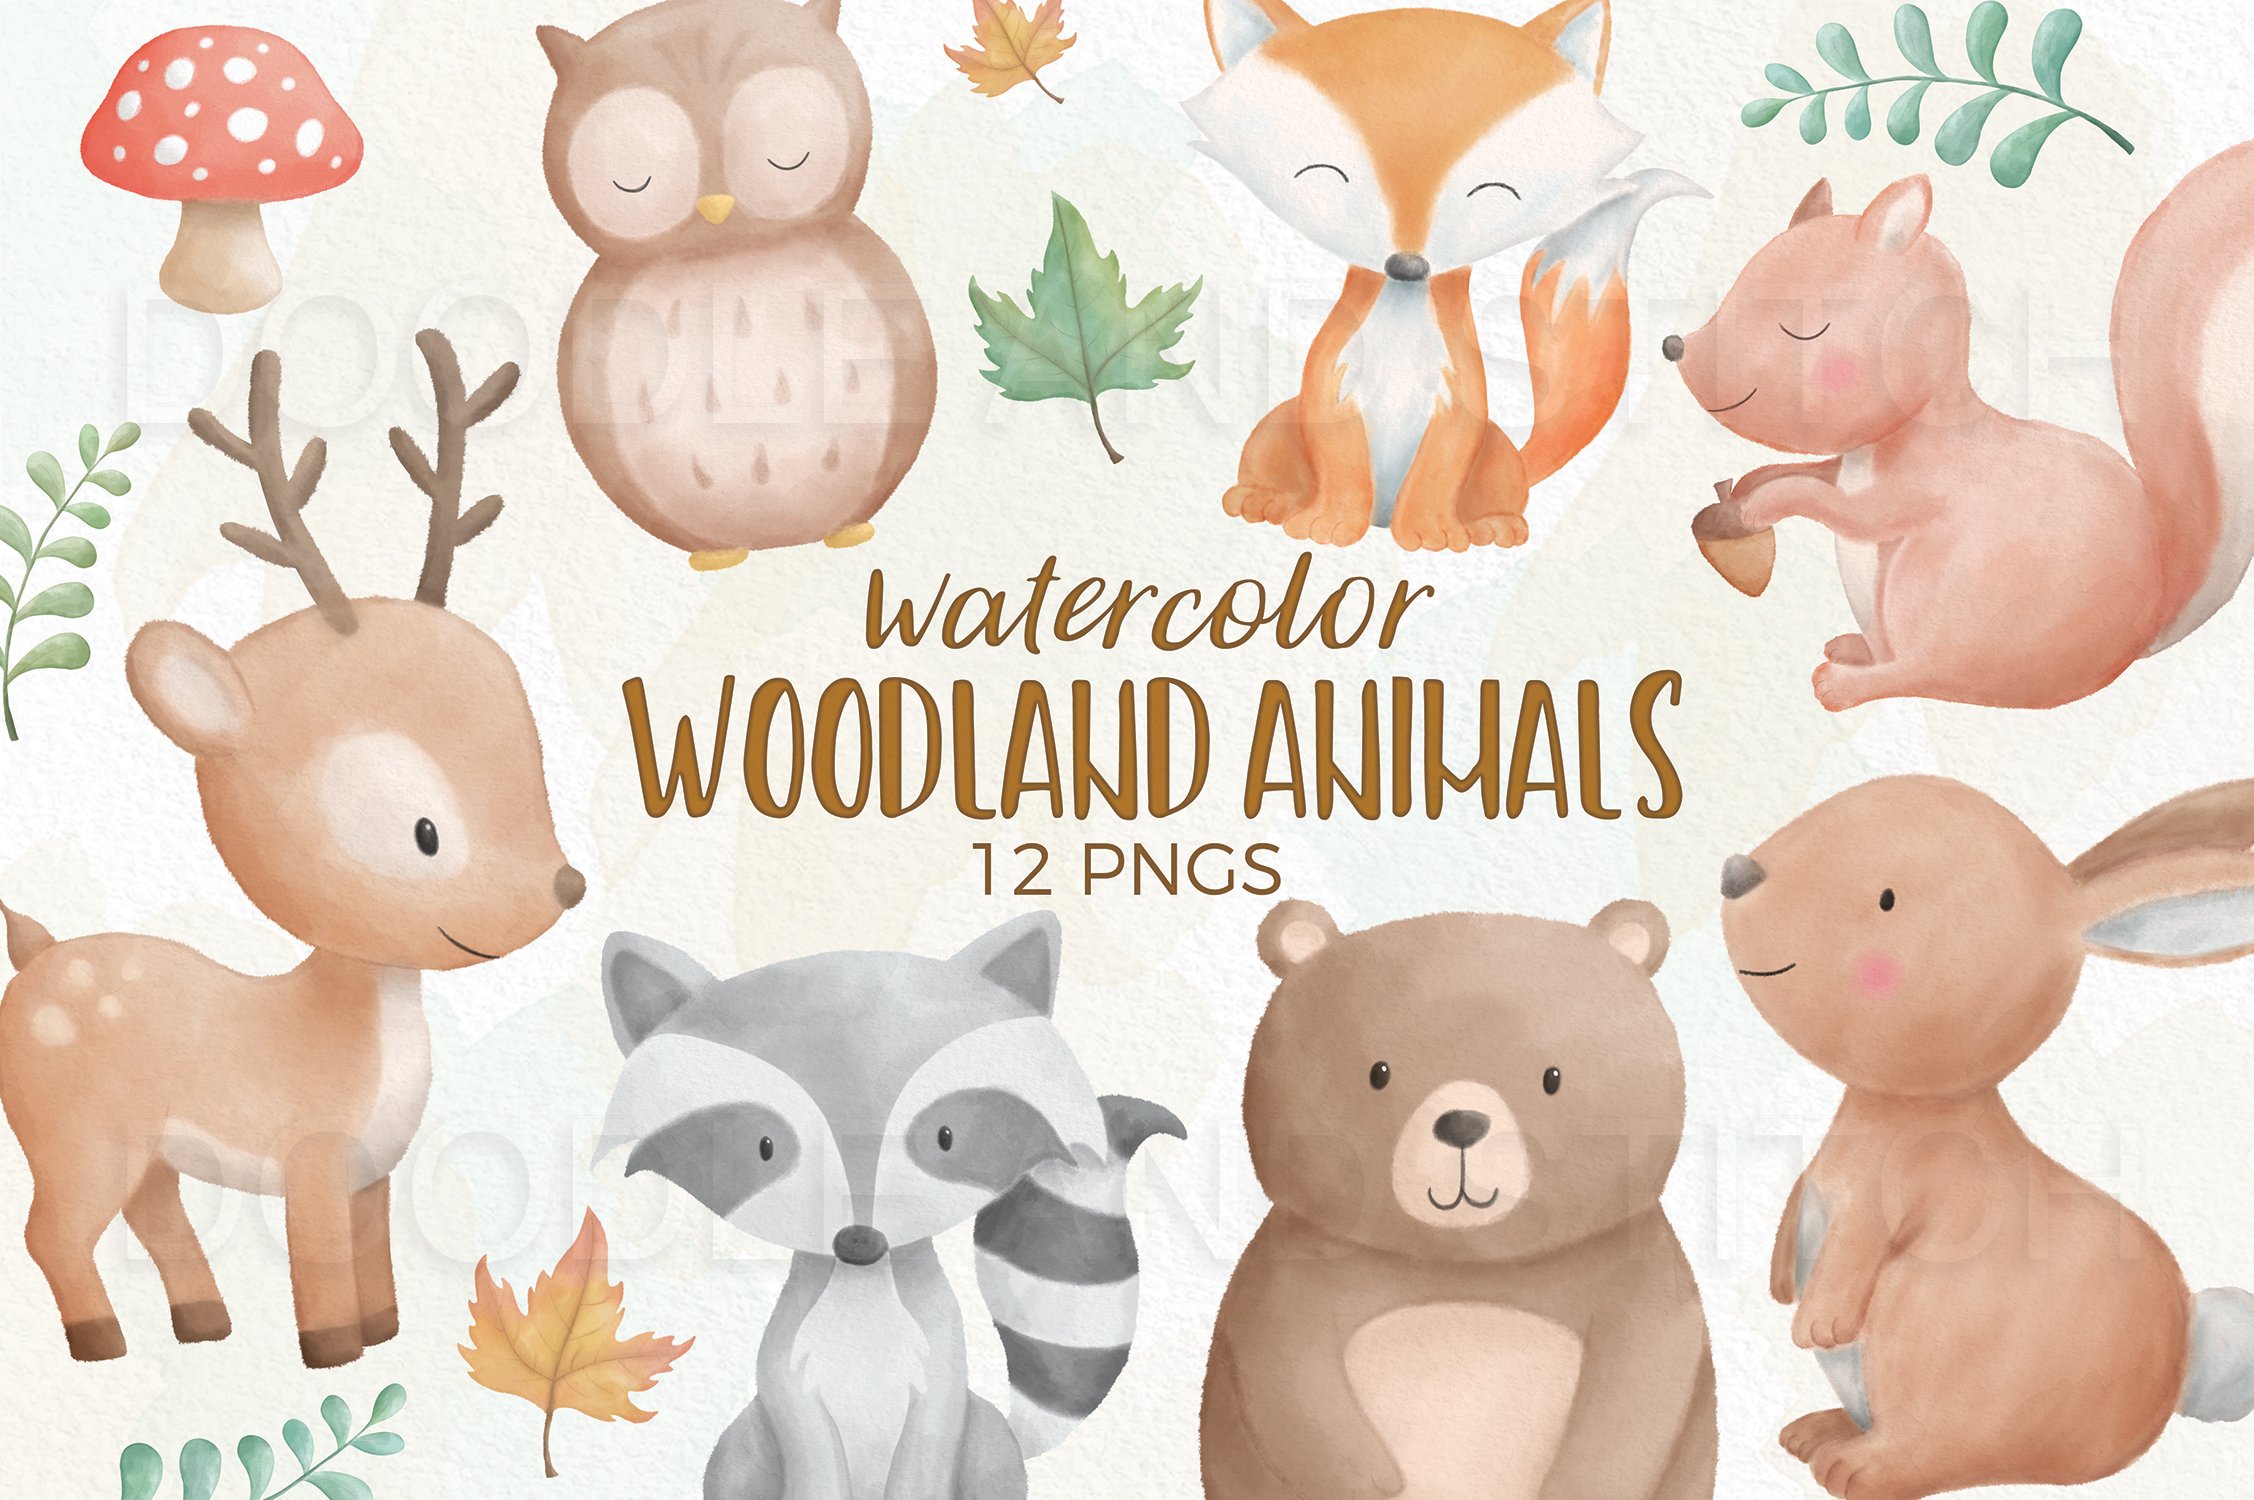 Woodland Animal Watercolor Designs cover image.